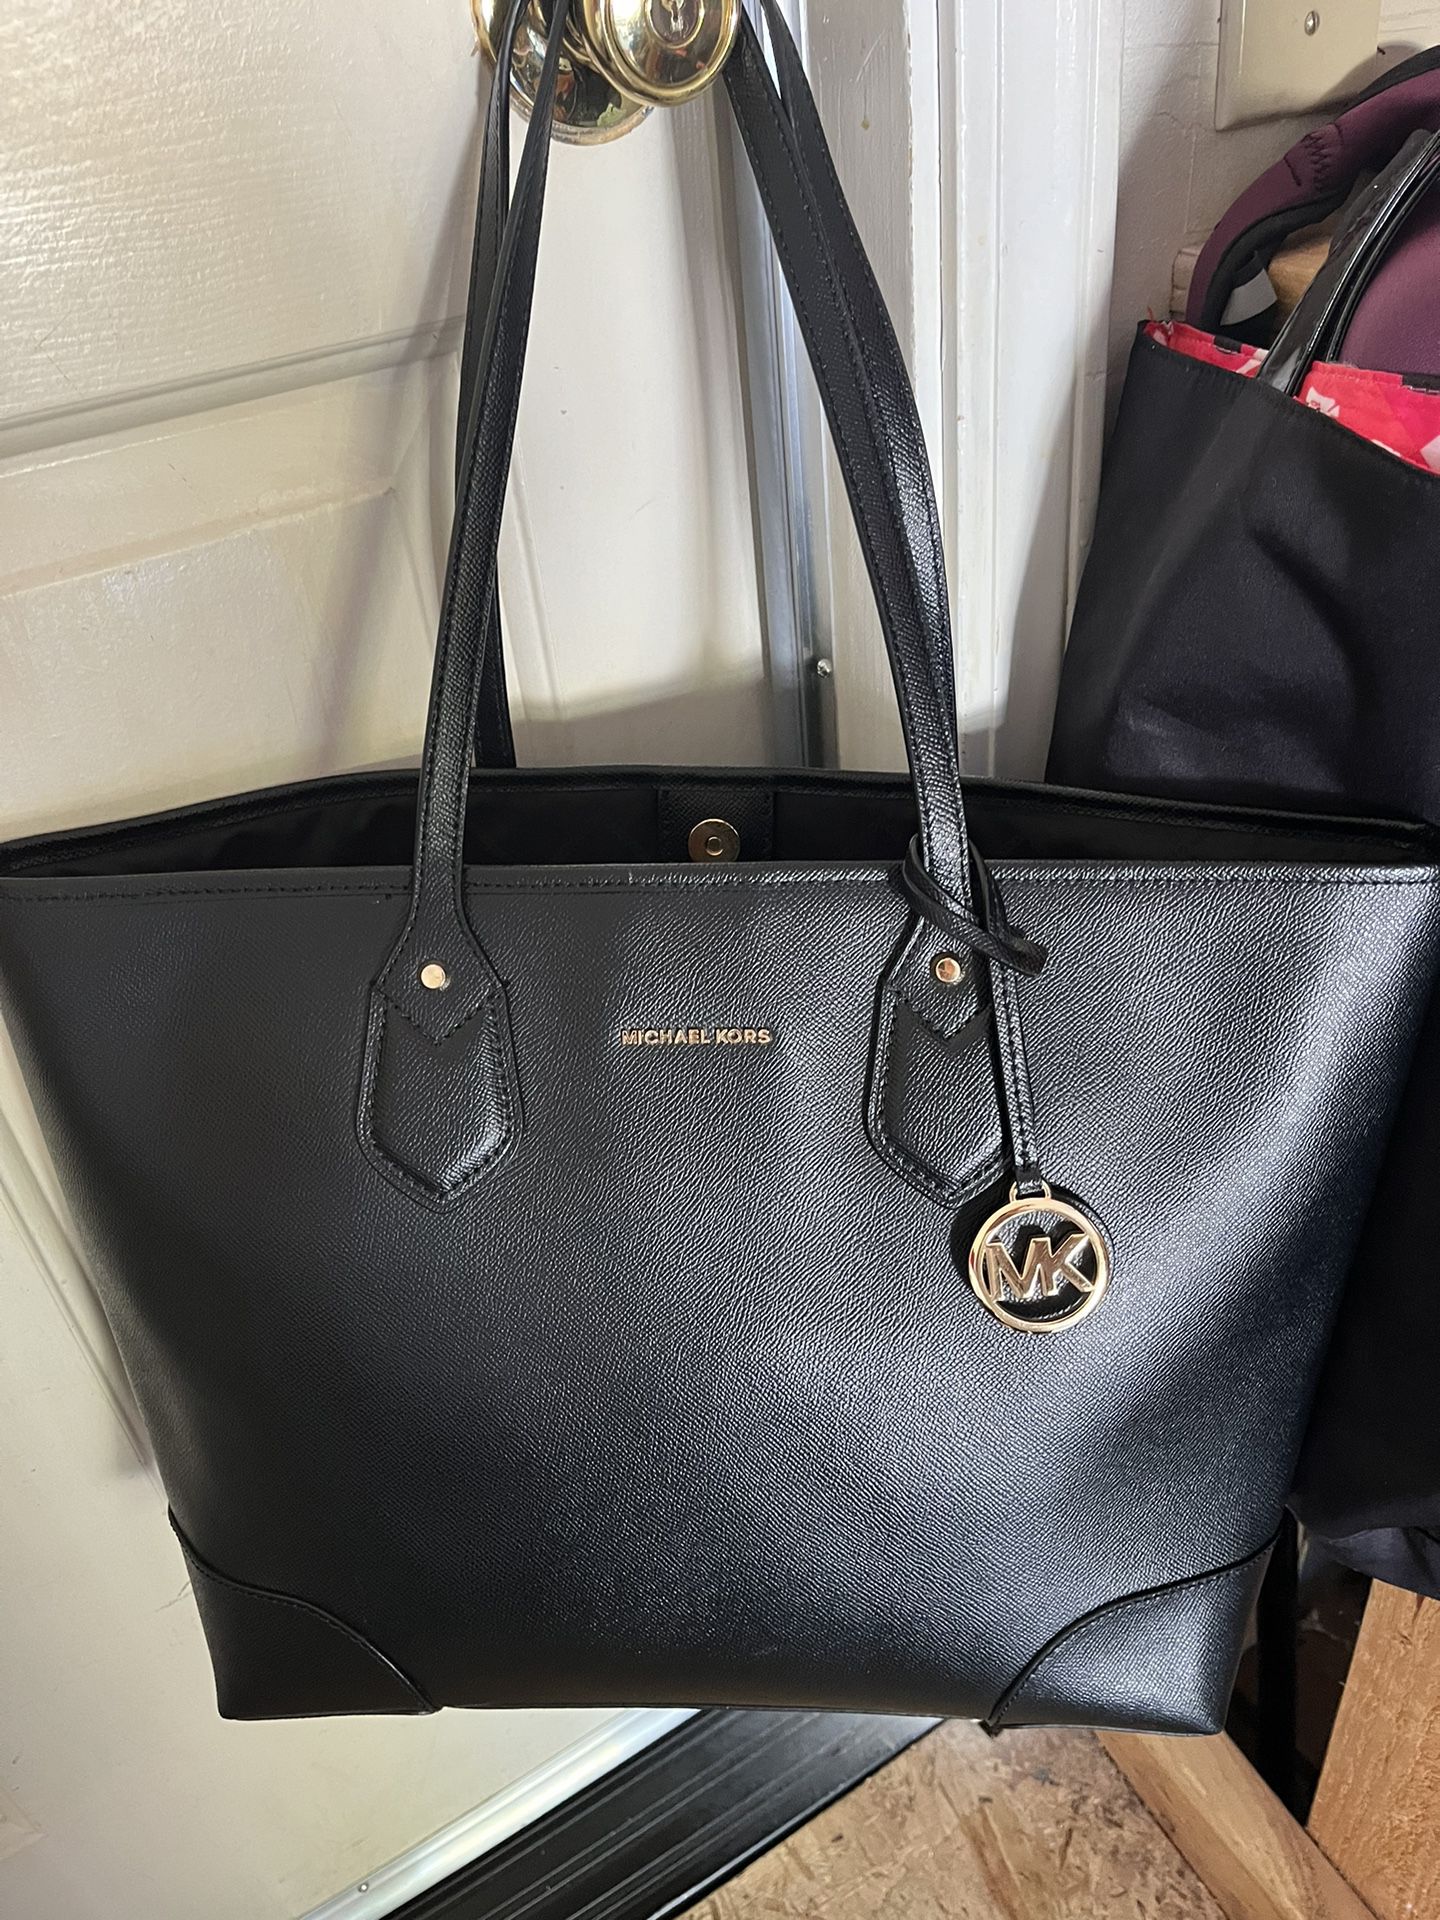 Michael Kors Purse Condition Like New it’s hundred percent leather